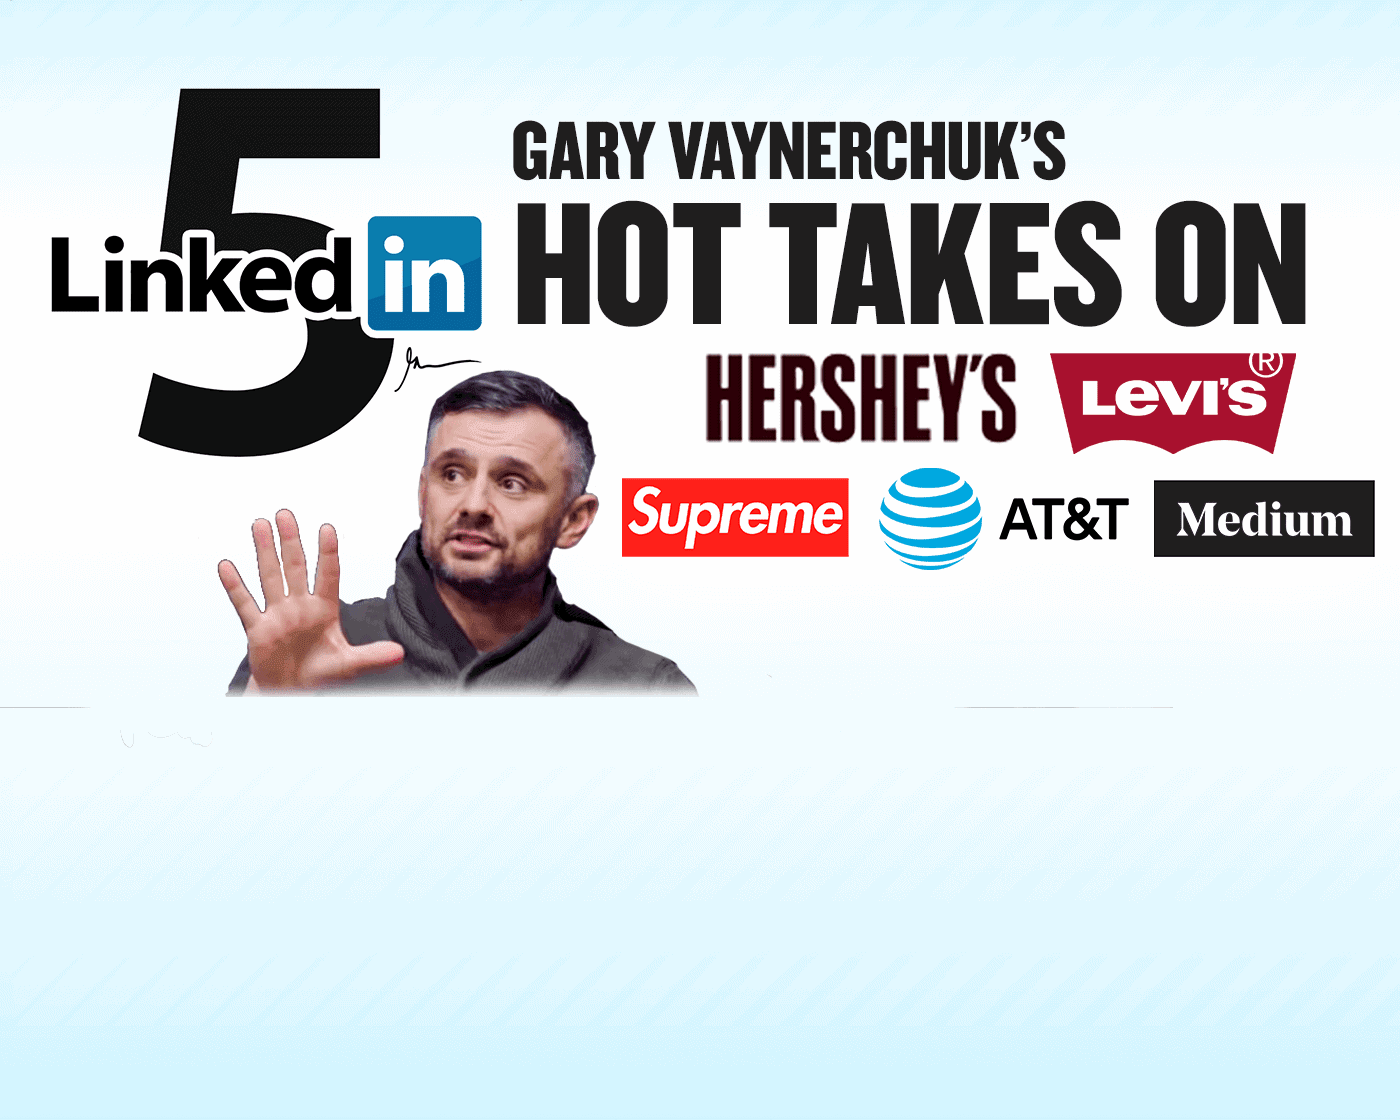 LinkedIn 5: Hot Takes On Hershey’s, Levi’s, Supreme, AT&T, and Medium